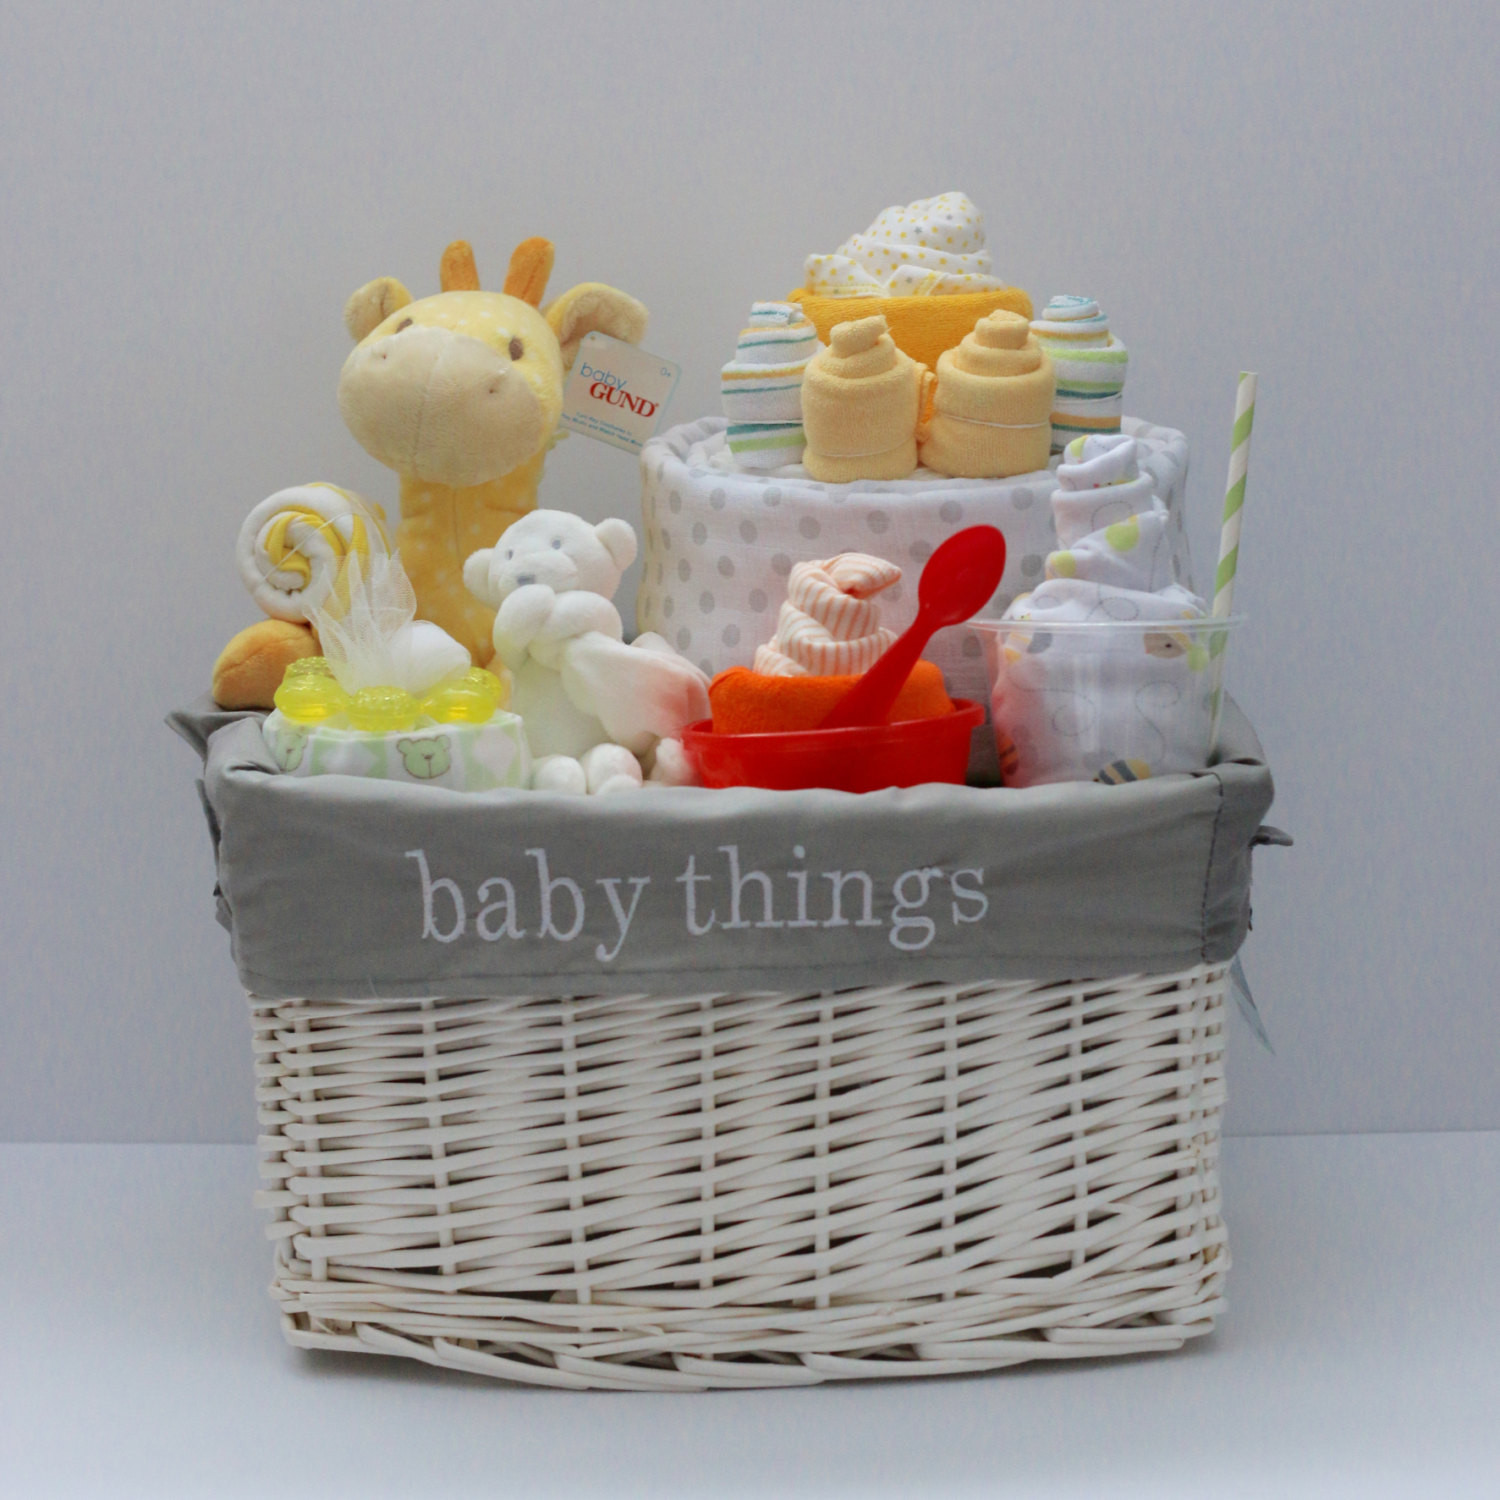 Unique Personalized Baby Gifts
 Gender Neutral Baby Gift Basket Baby Shower Gift Unique Baby